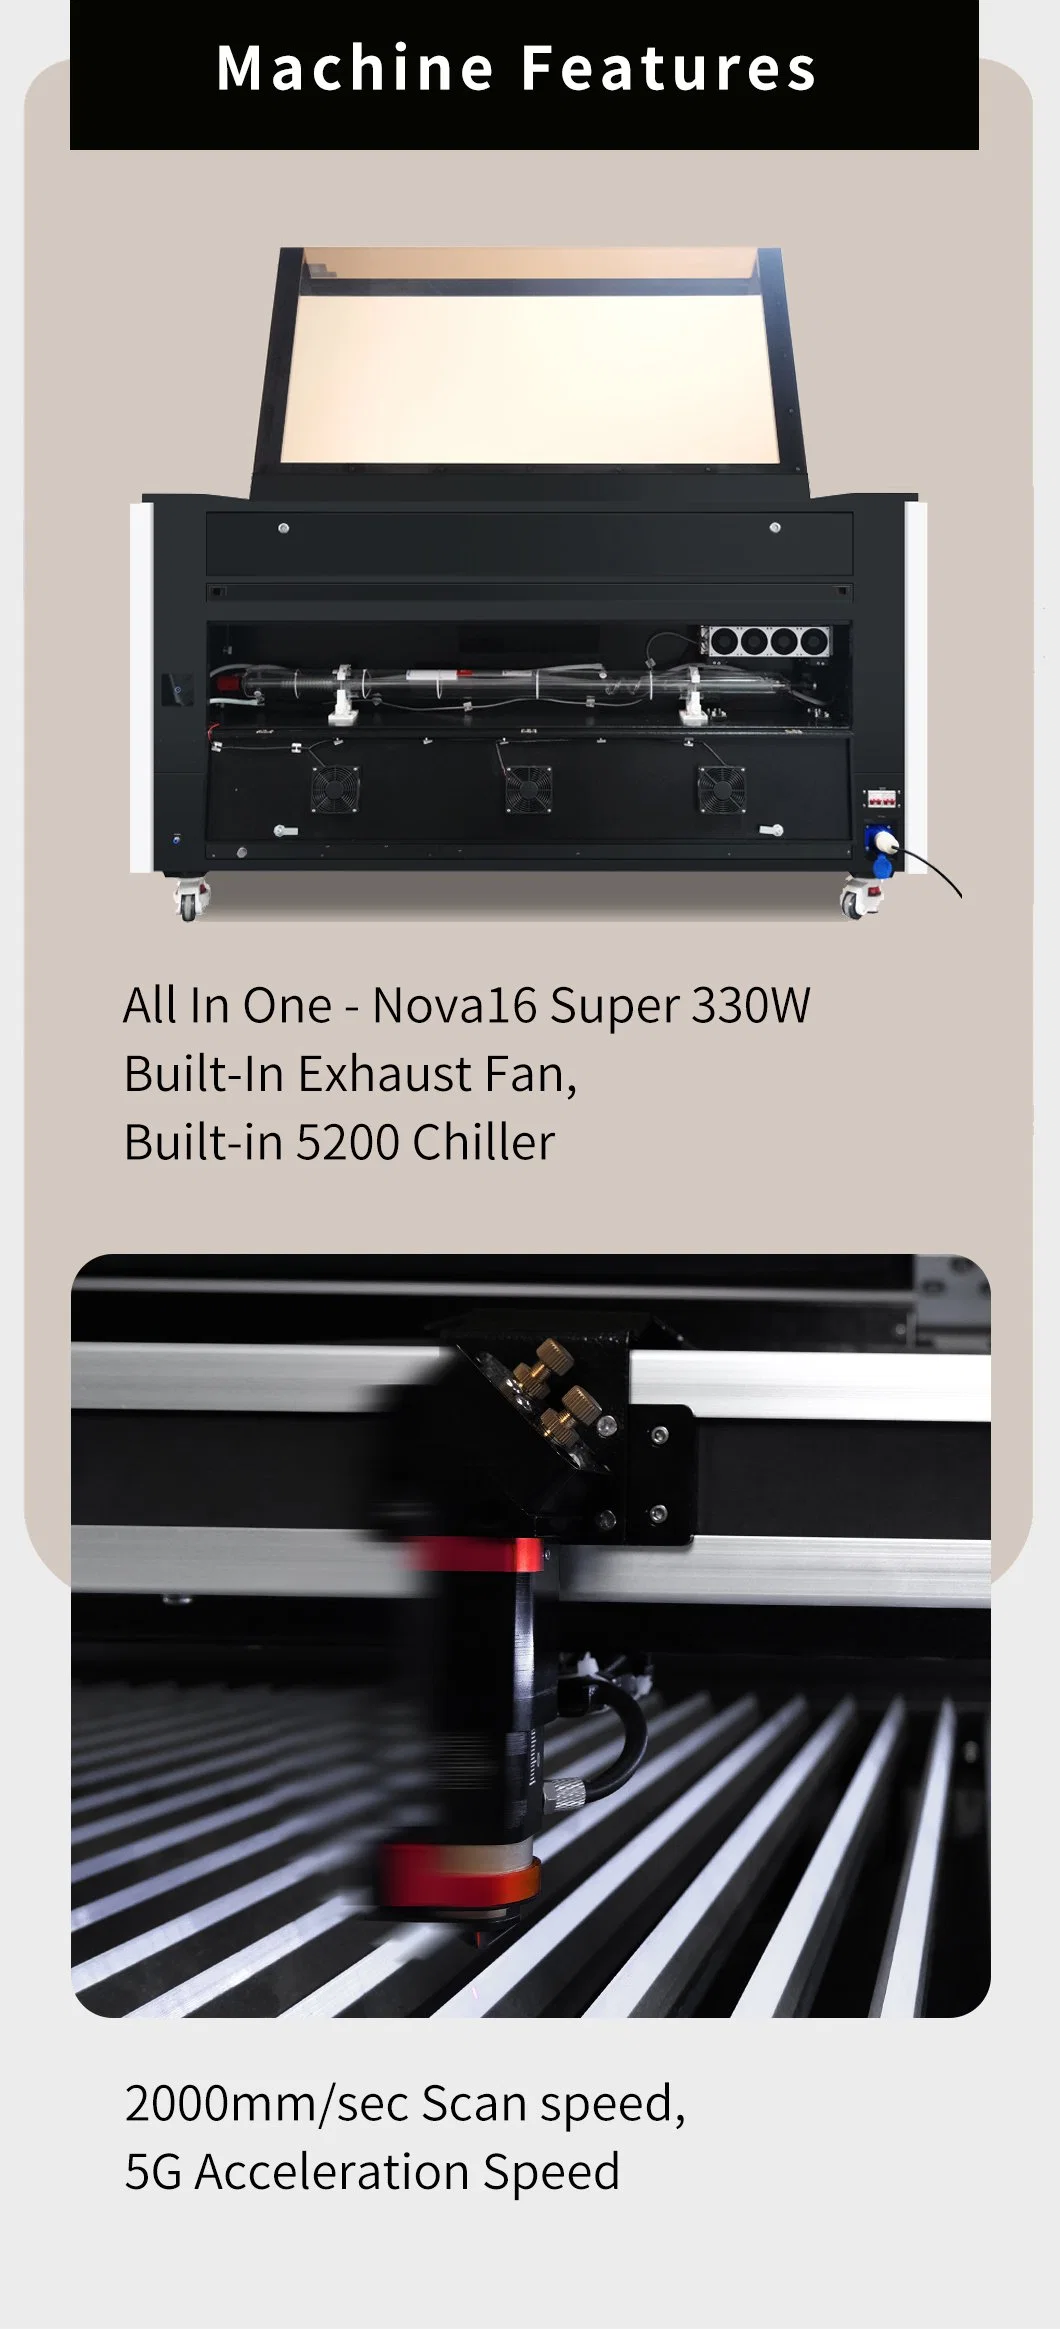 1610 CO2 CNC Laser Engraver with 130W/150W CO2 Glass Tube +RF30W/60W Metal Tube for Wood